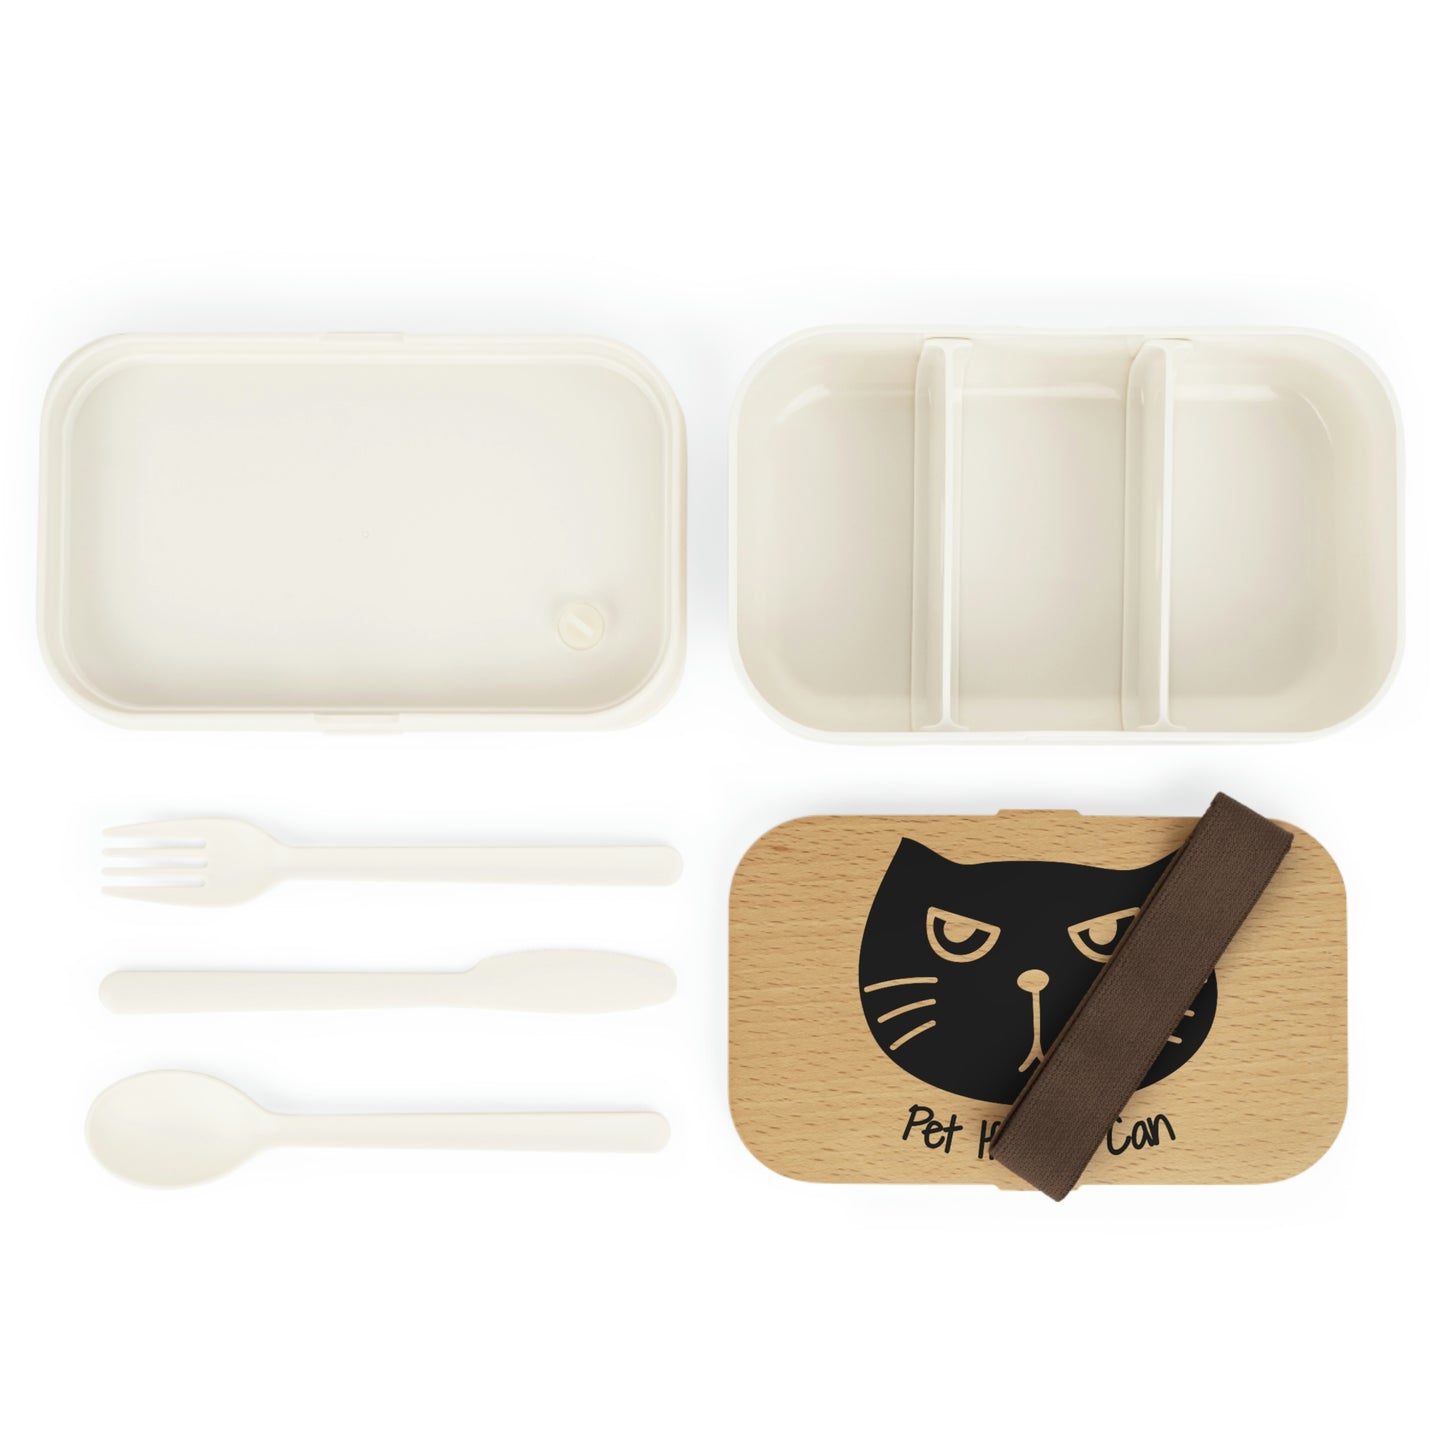 Funny cat Pet If You Can Bento Lunch Box, kawaii bento box, cat bento box, back to school, cute lunch bag, gift for her, black cat lunch box